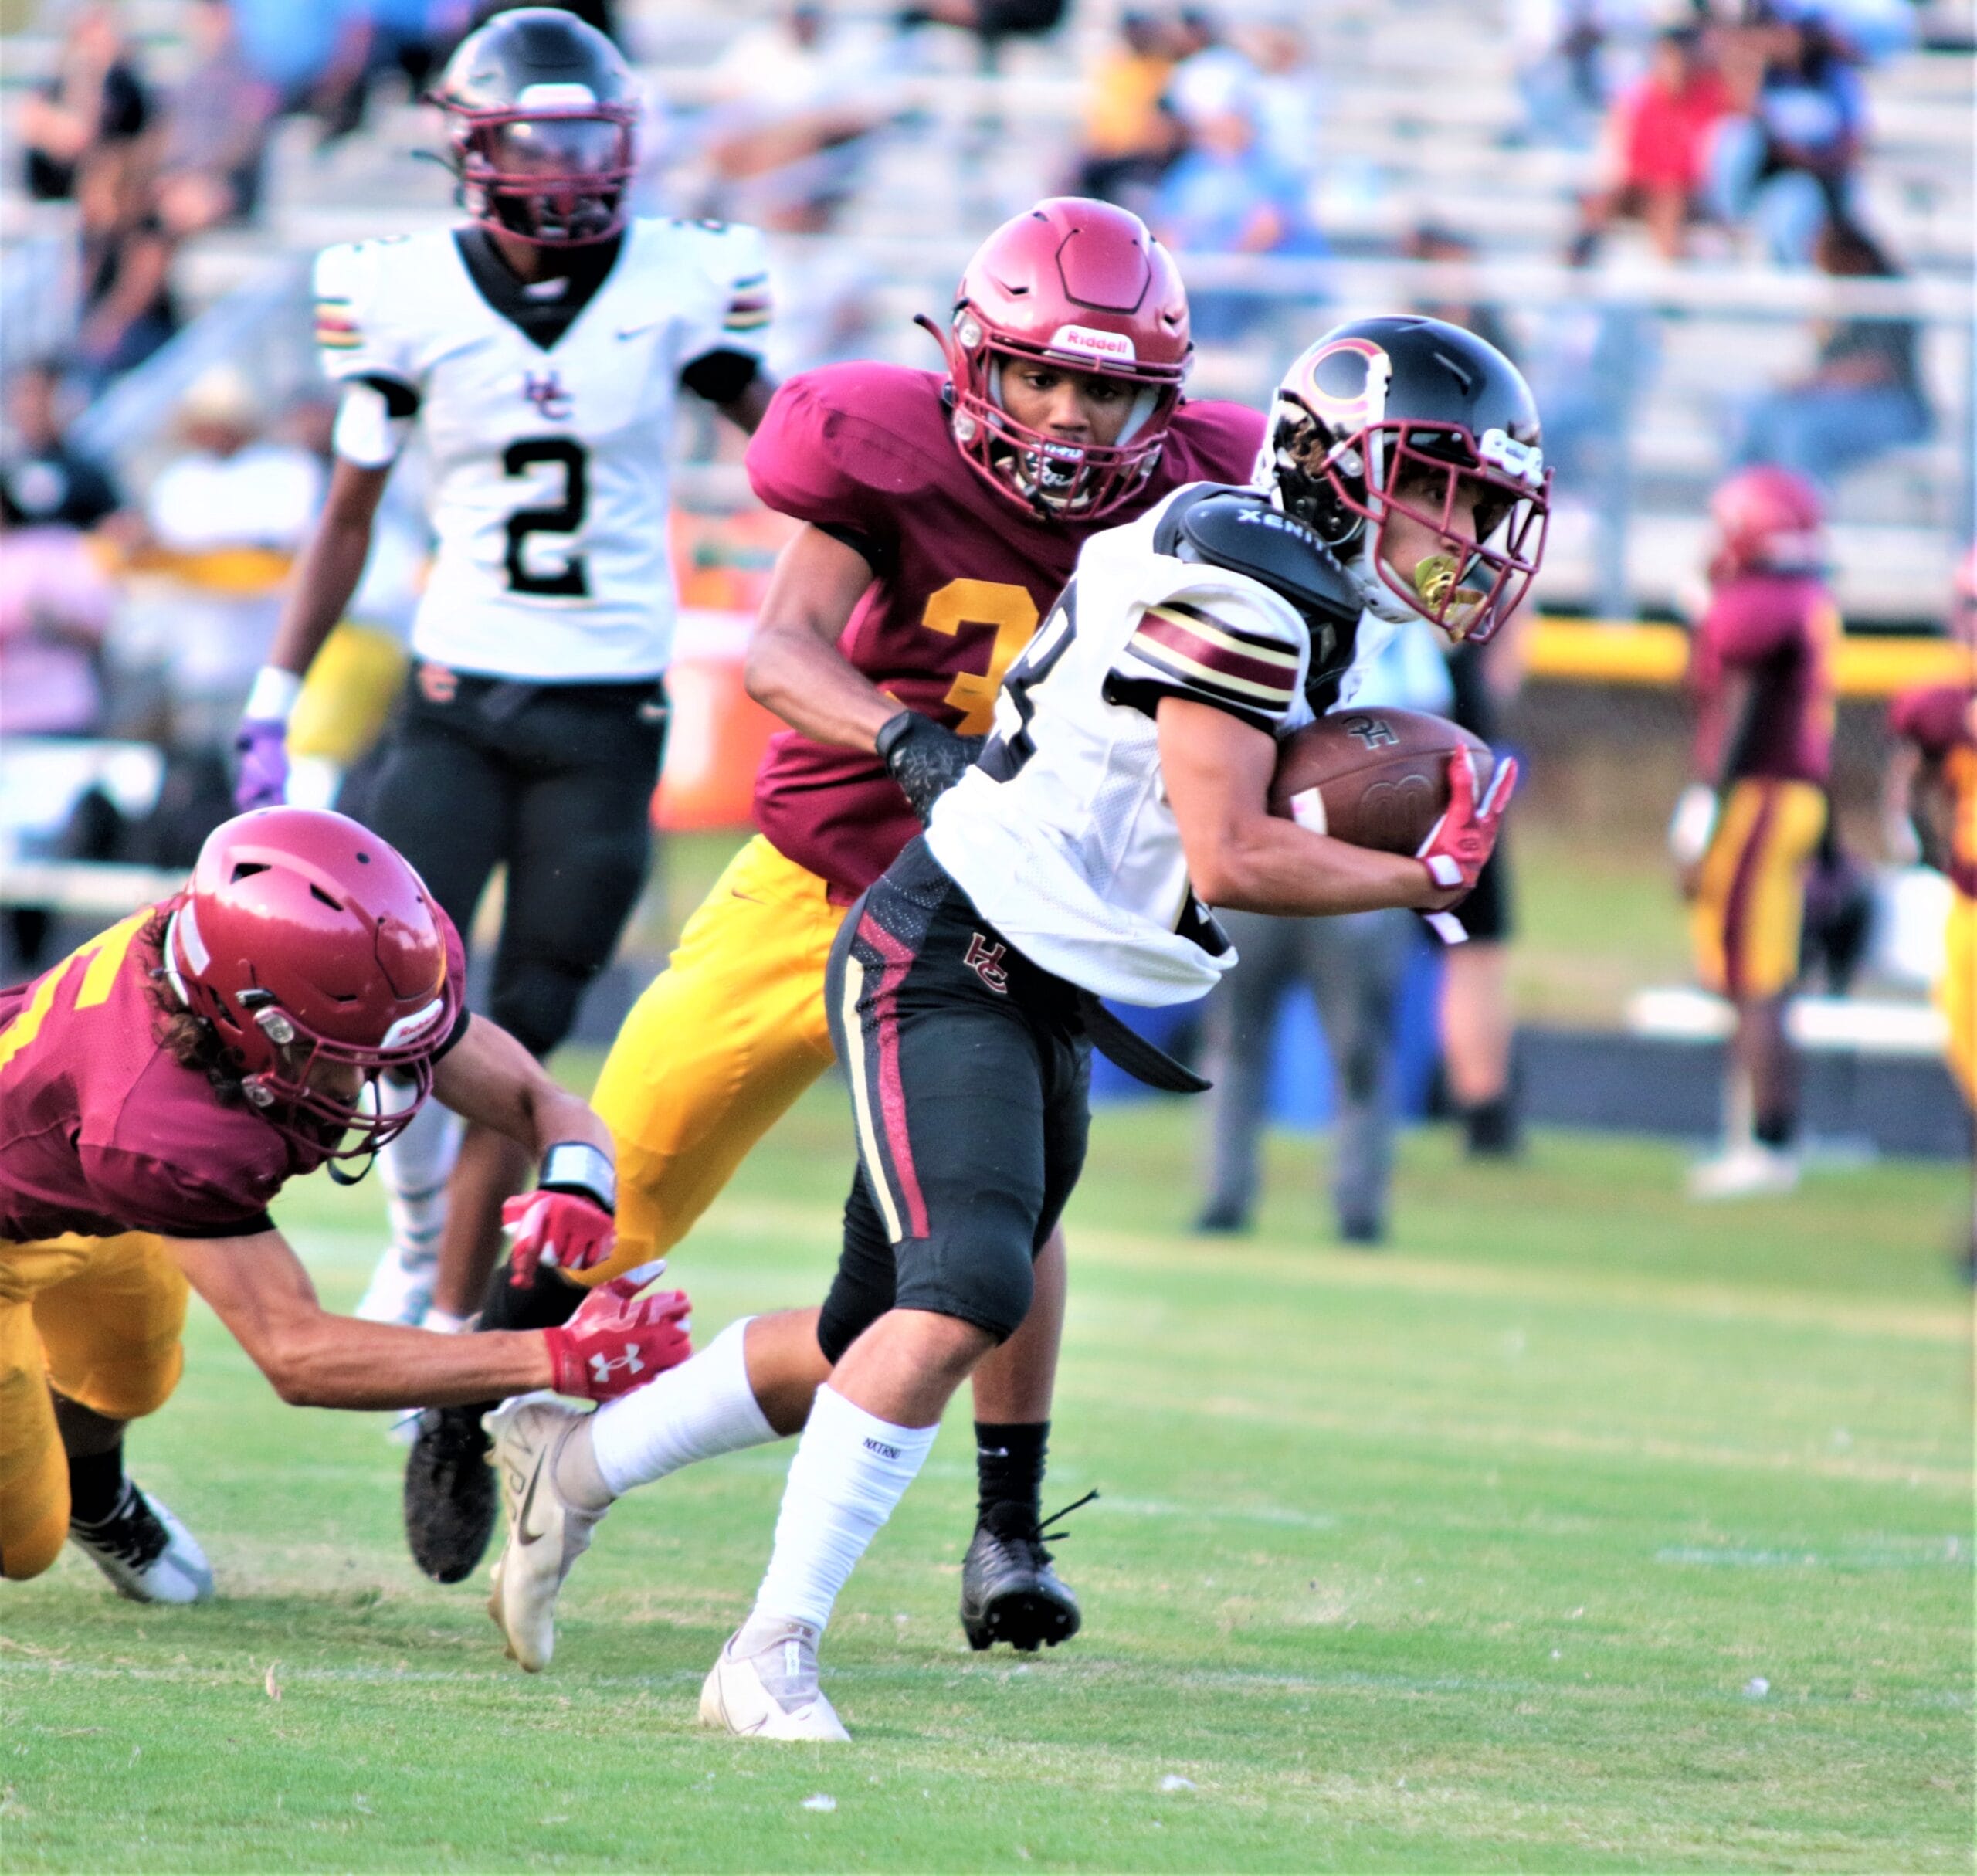 Central shows improvement from first scrimmage